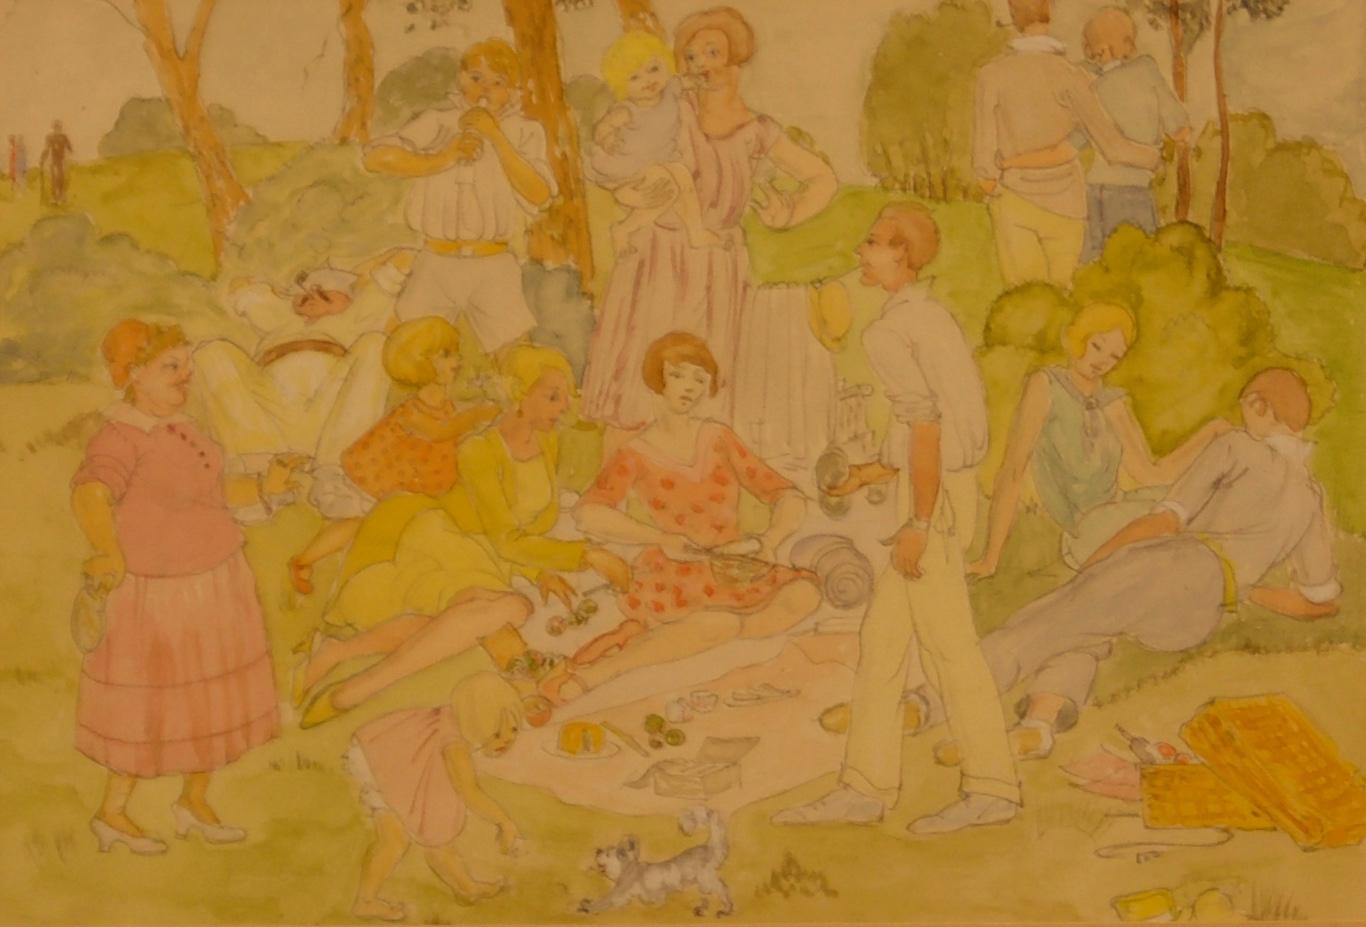 Unknown Landscape Art - Family Picnic - 20th Century Watercolour of a Picnic in the Park Family Day Out